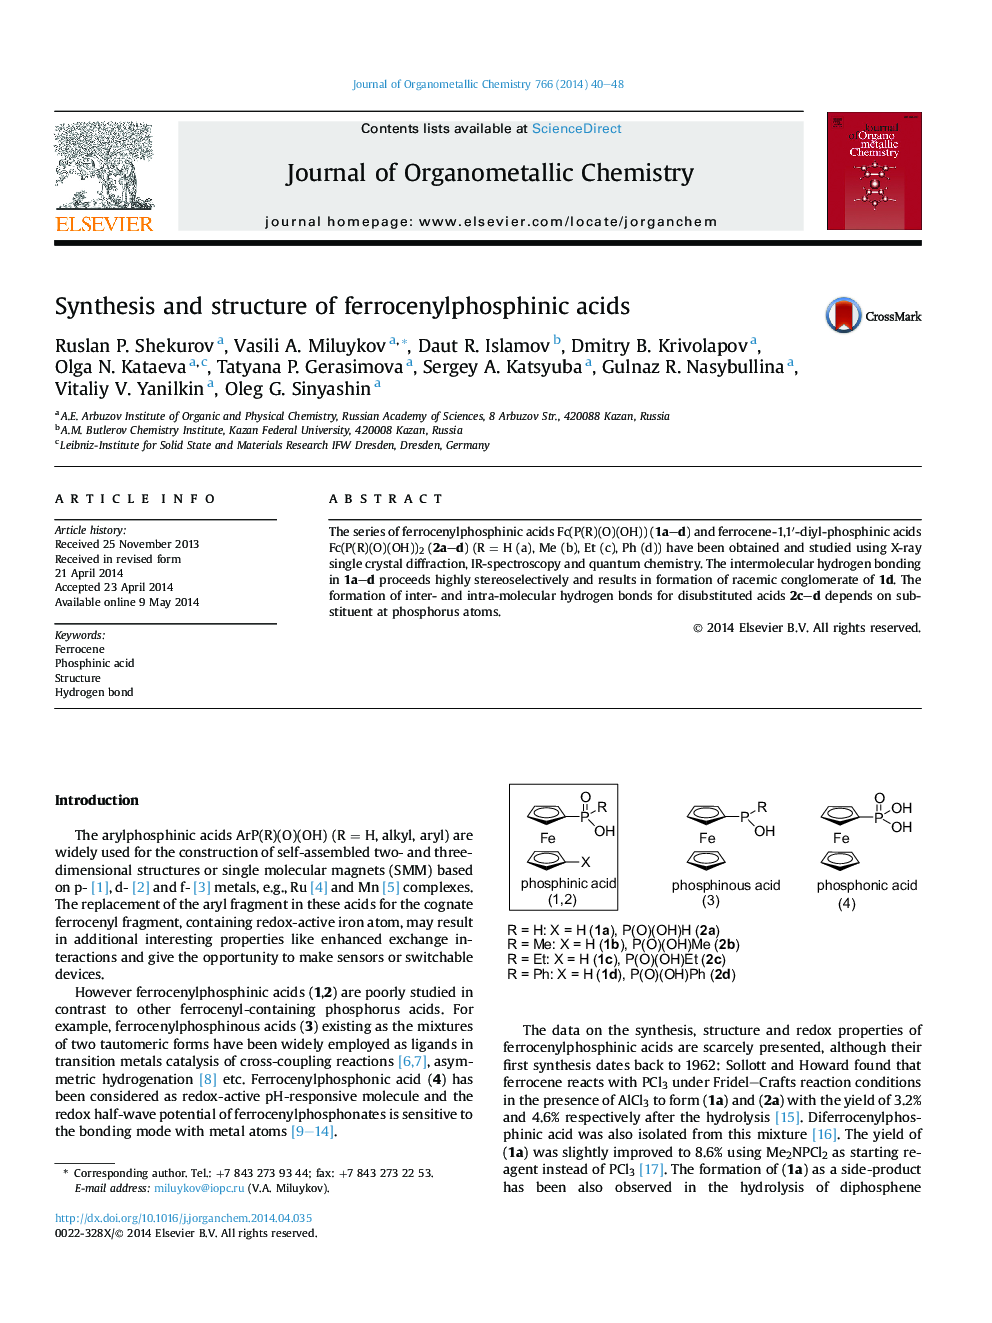 Synthesis and structure of ferrocenylphosphinic acids